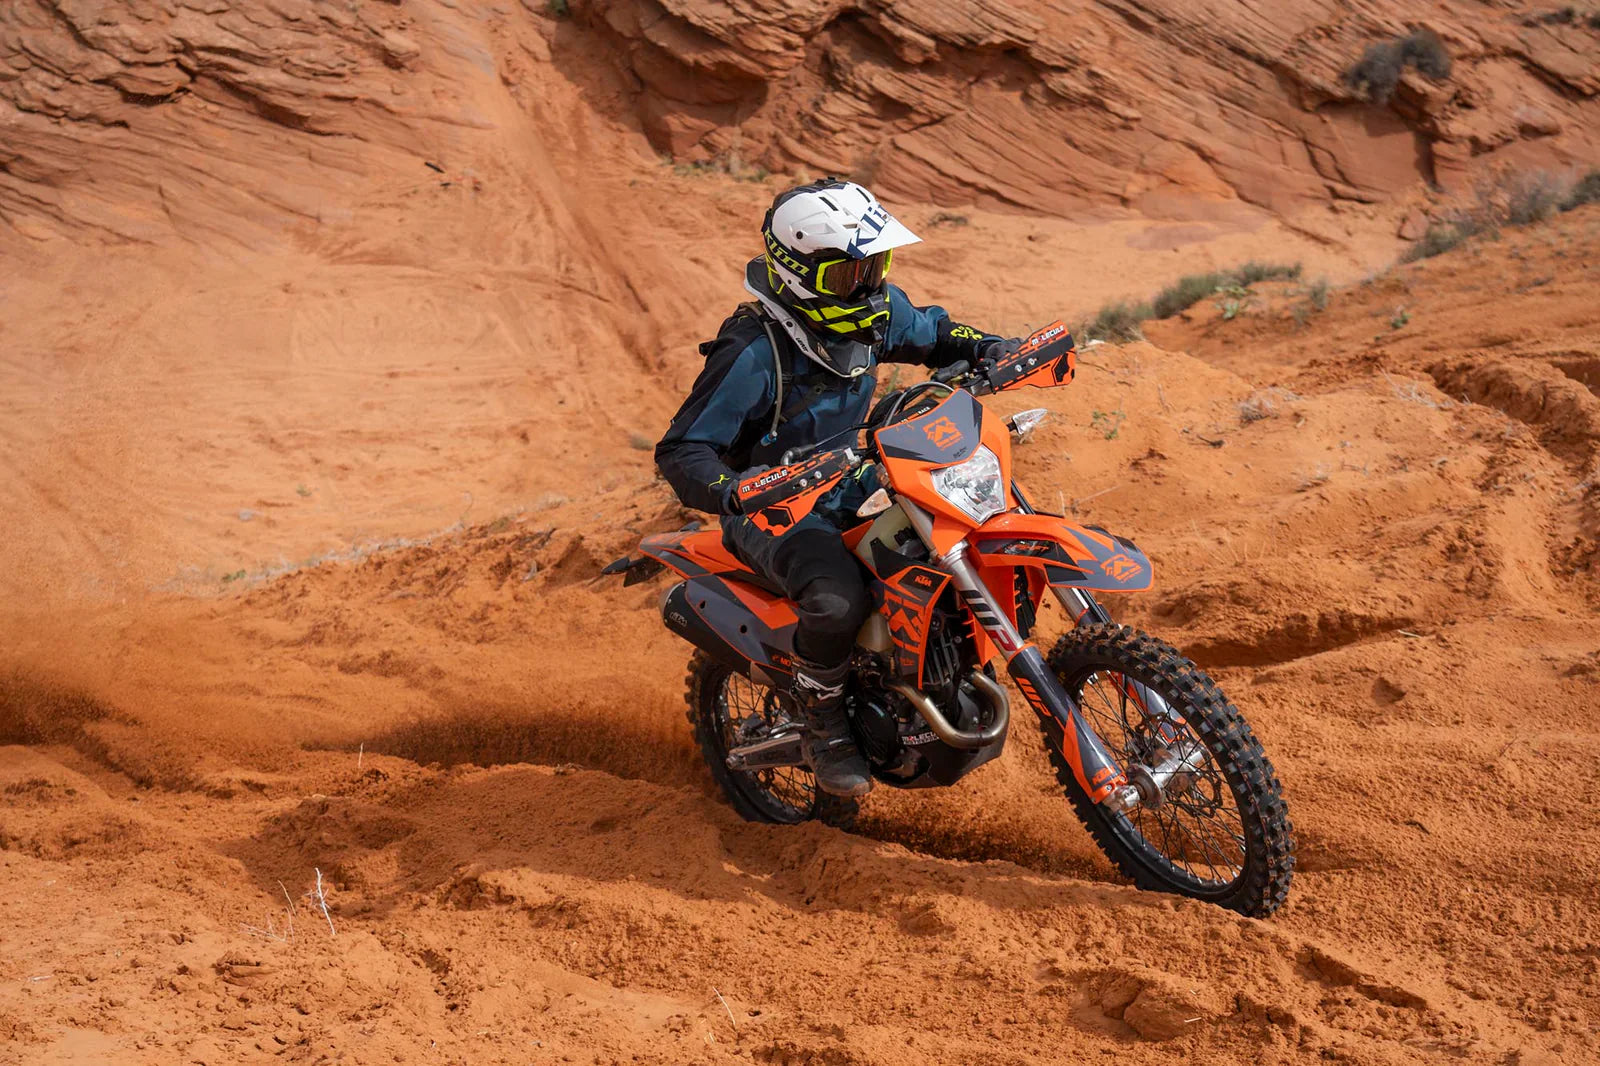 TESTED: DUNLOP MOTORCYCLE TIRES GEOMAX AT82